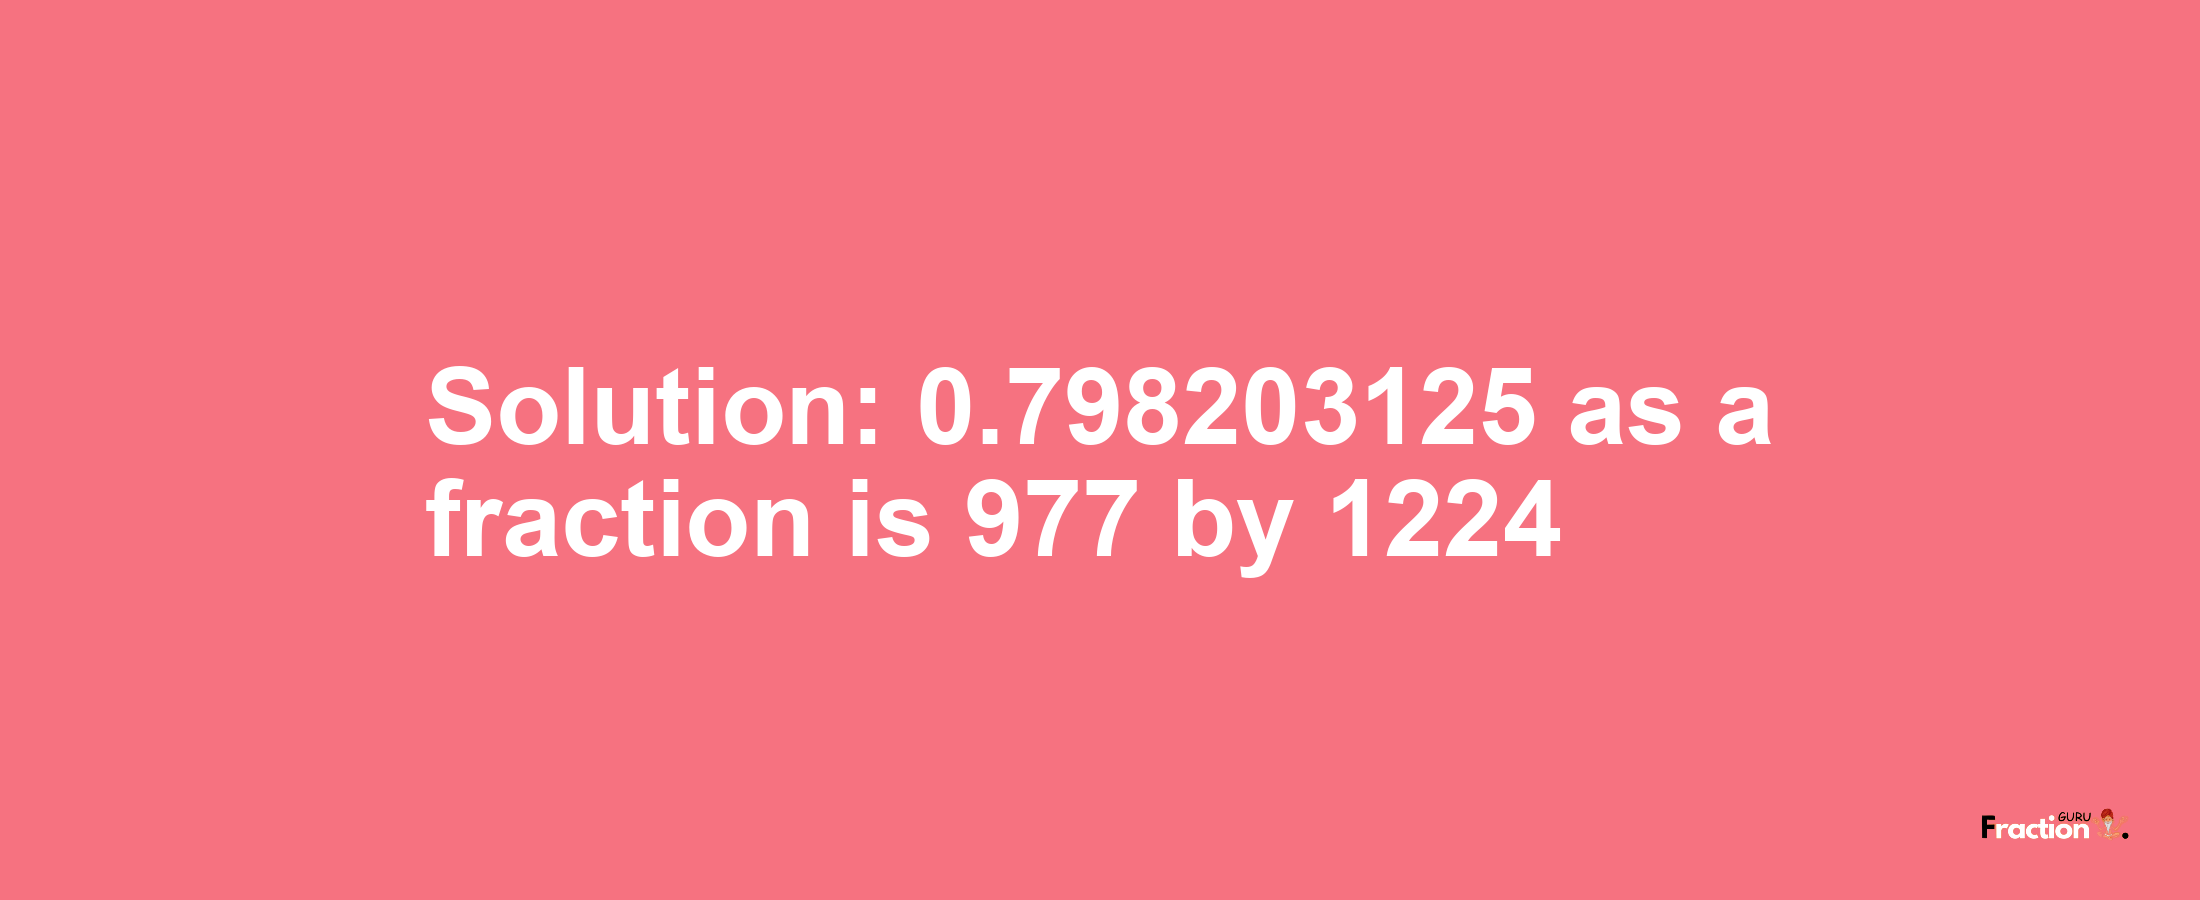 Solution:0.798203125 as a fraction is 977/1224